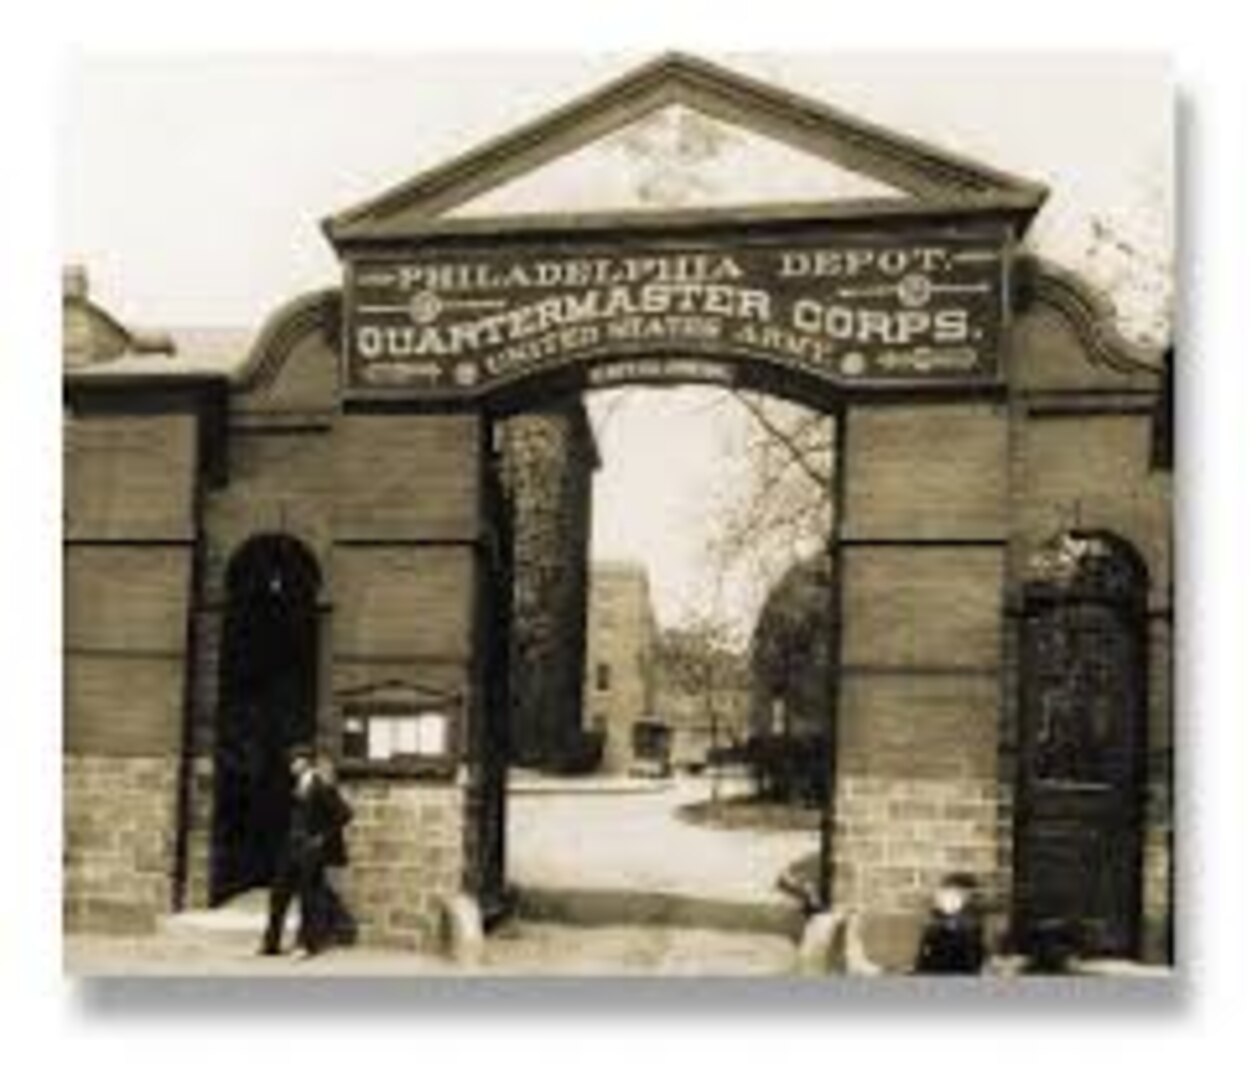 A view of the gate at the Philadelphia Quartermaster Depot at its original location where the DLA Troop Support Product Test Center Analytical mission began in 1919.